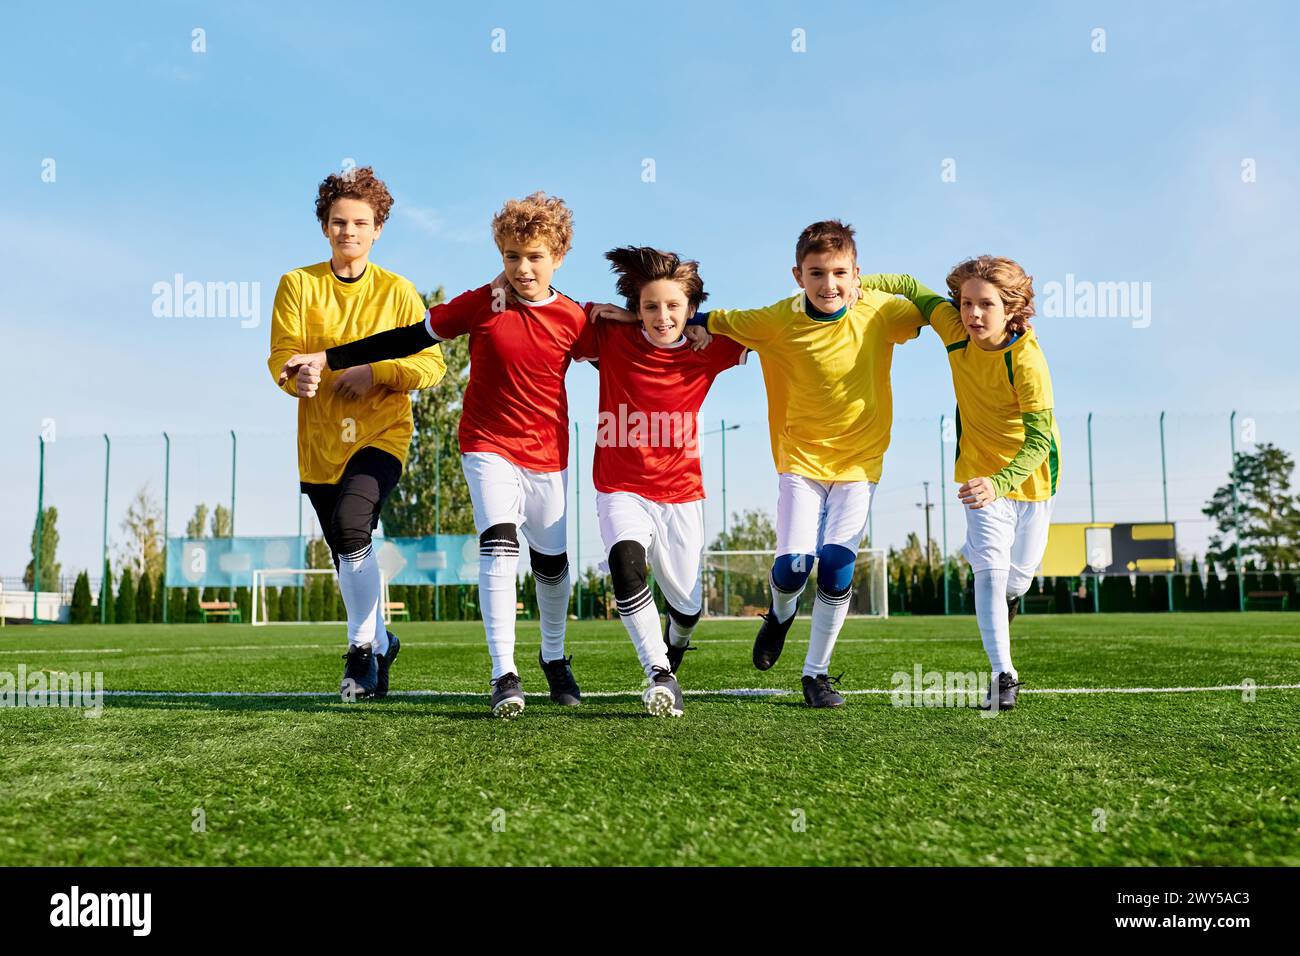 A group of young men engaged in a lively soccer game, kicking the ball around as they compete on the field with energy and teamwork. Stock Photo